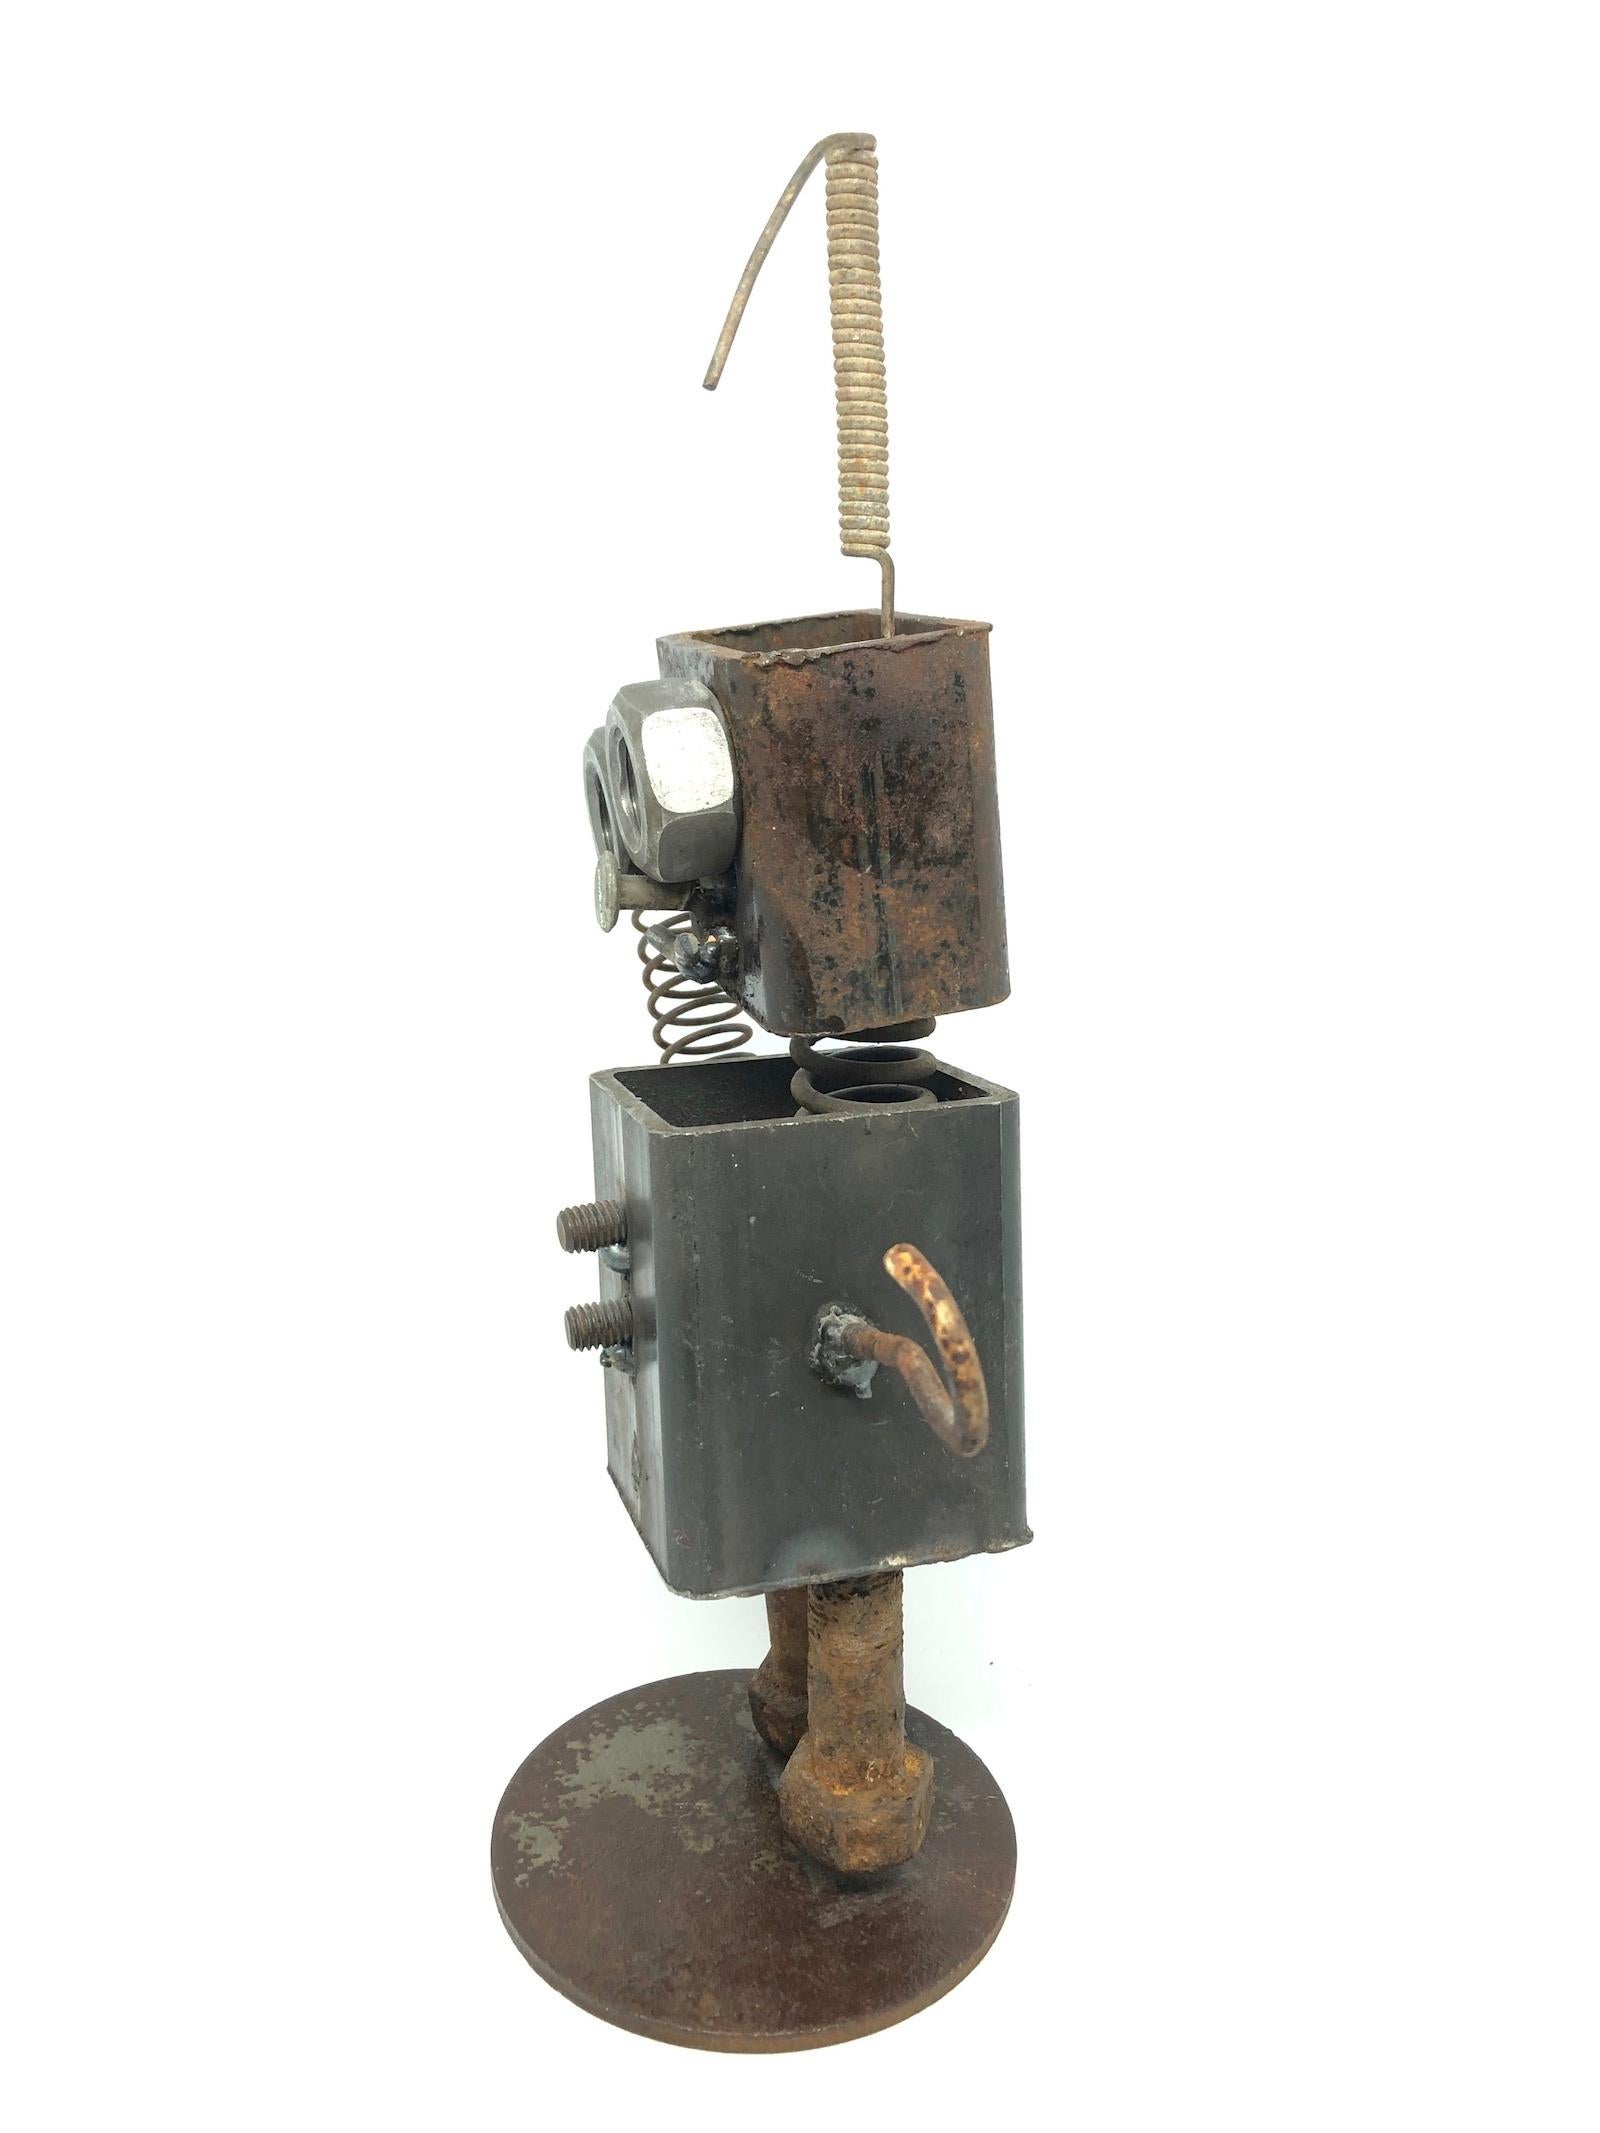 A handmade scrap metal robot statue. Some parts are rusty some with patina. A nice architectural sculpture for every living room or men’s cave. Some scratches and a nice patina due to the age.